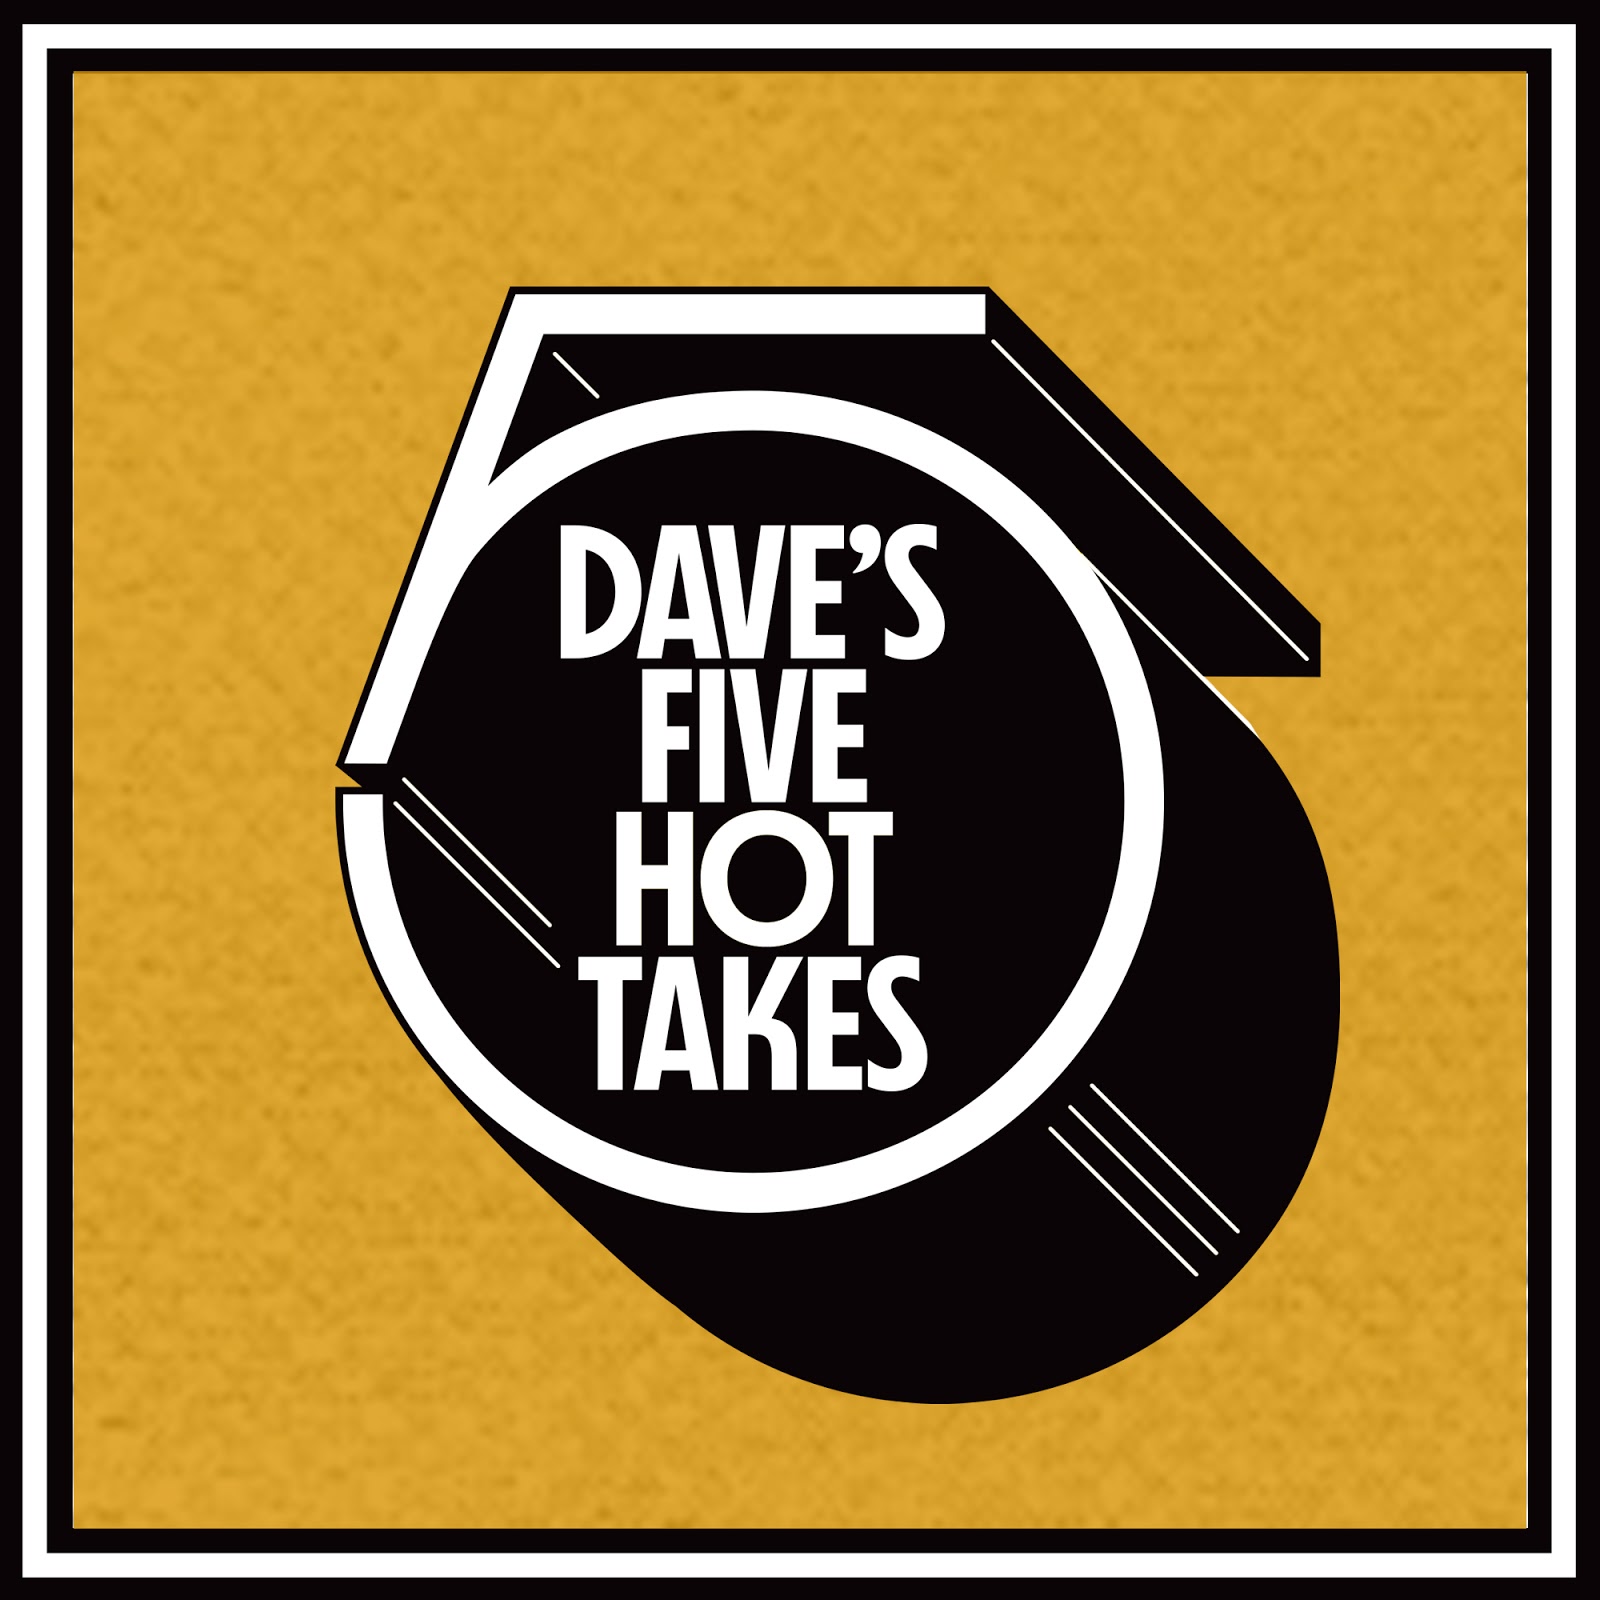 Introducing Dave’s 5 Hot Takes